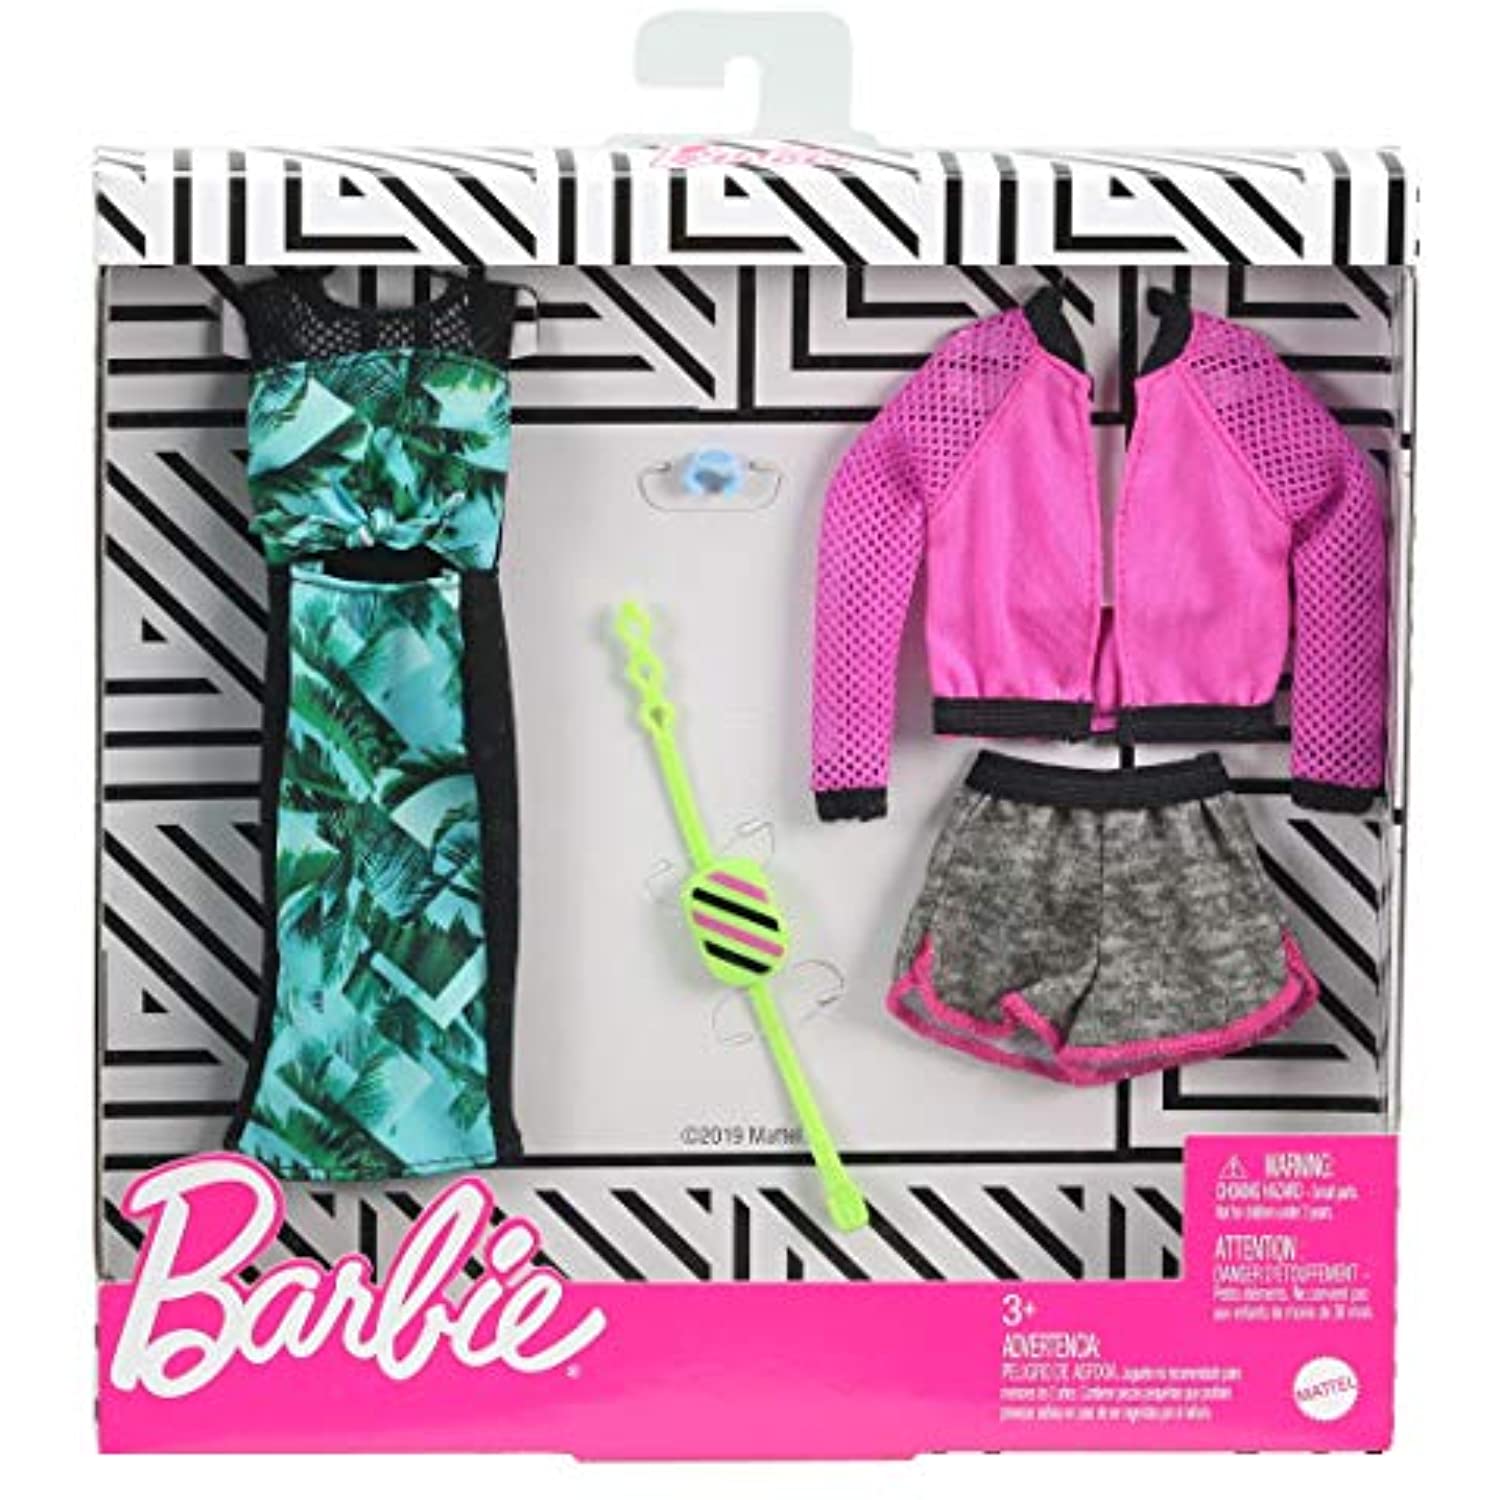 Barbie Fashions 2-Pack Clothing Set, 2 Outfits Doll Include Pink Sport Jacket, Gray Shorts, Blue Tropical Print Dress & 2 Accessories, for Kids 3 to 8 Years Old